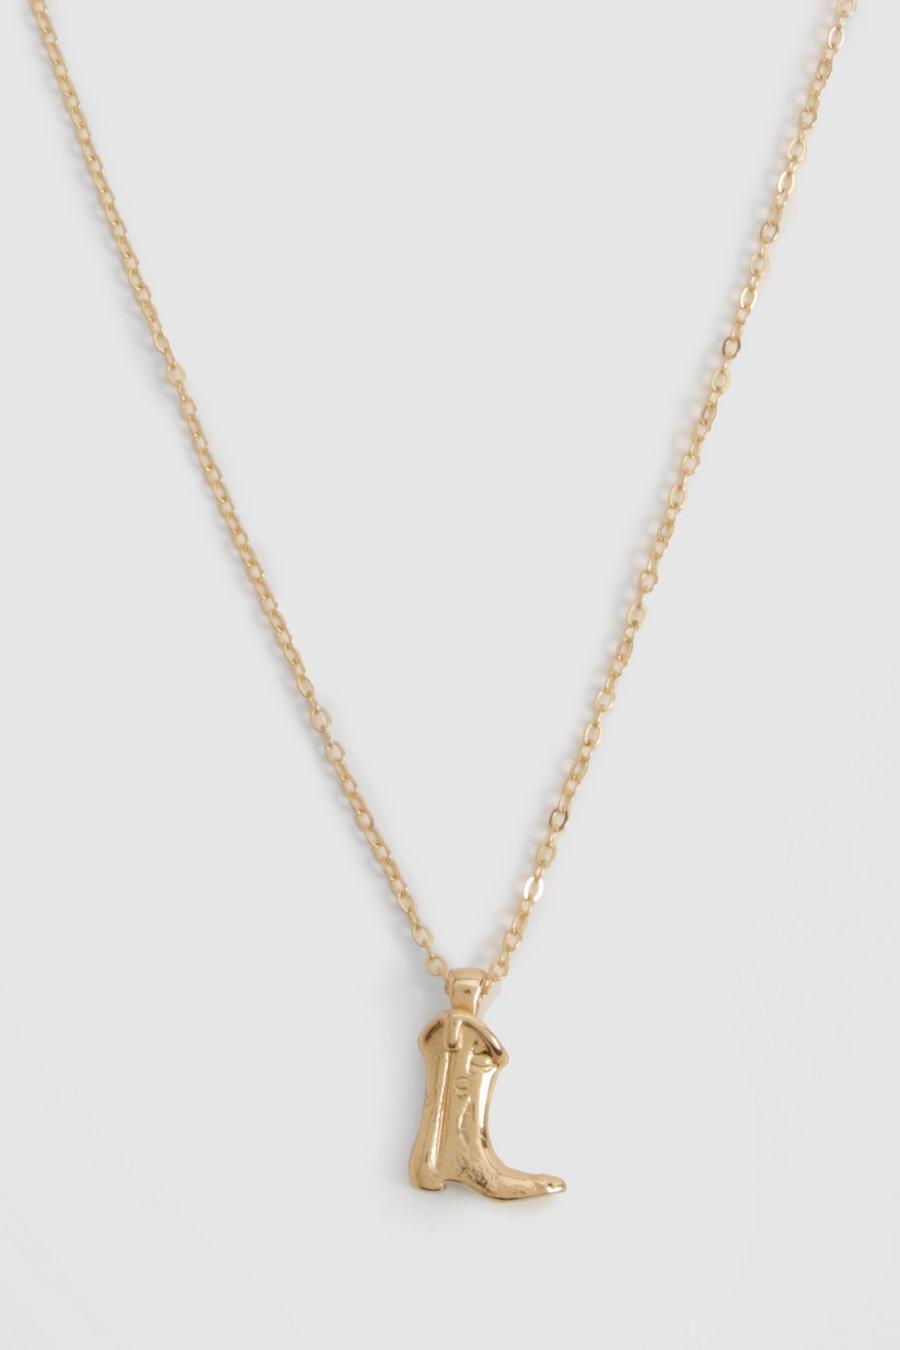 Gold Western Cowboy Boot Necklace